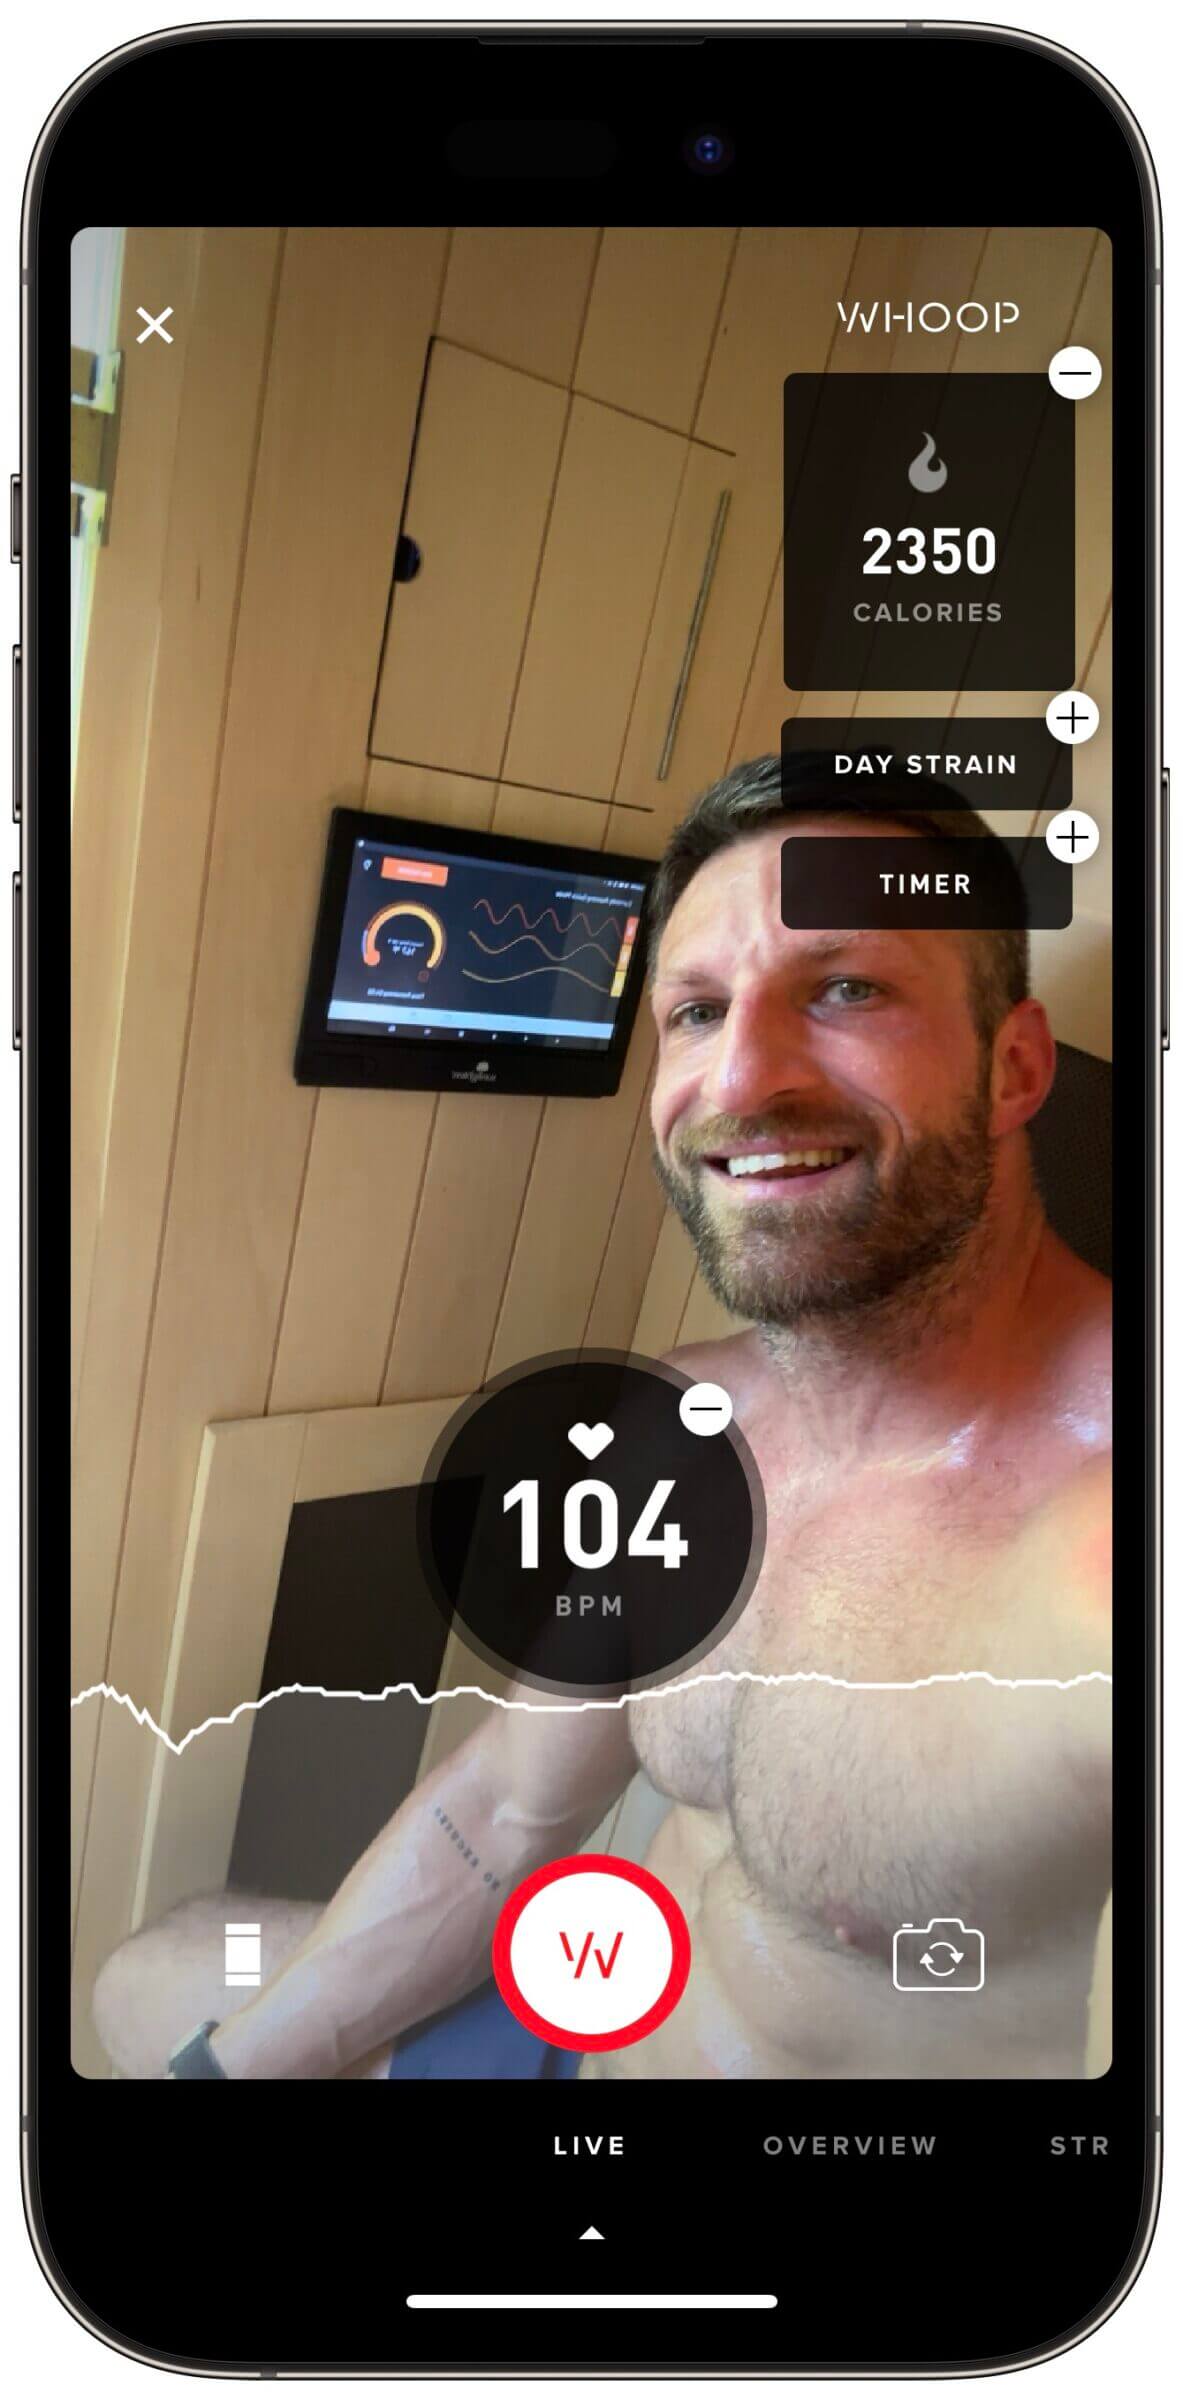 Inafrared sauna bathing increases my heart rate and sweat production (as reported by my WHOOP Strap), which is great for supporting the body's detox pathways.